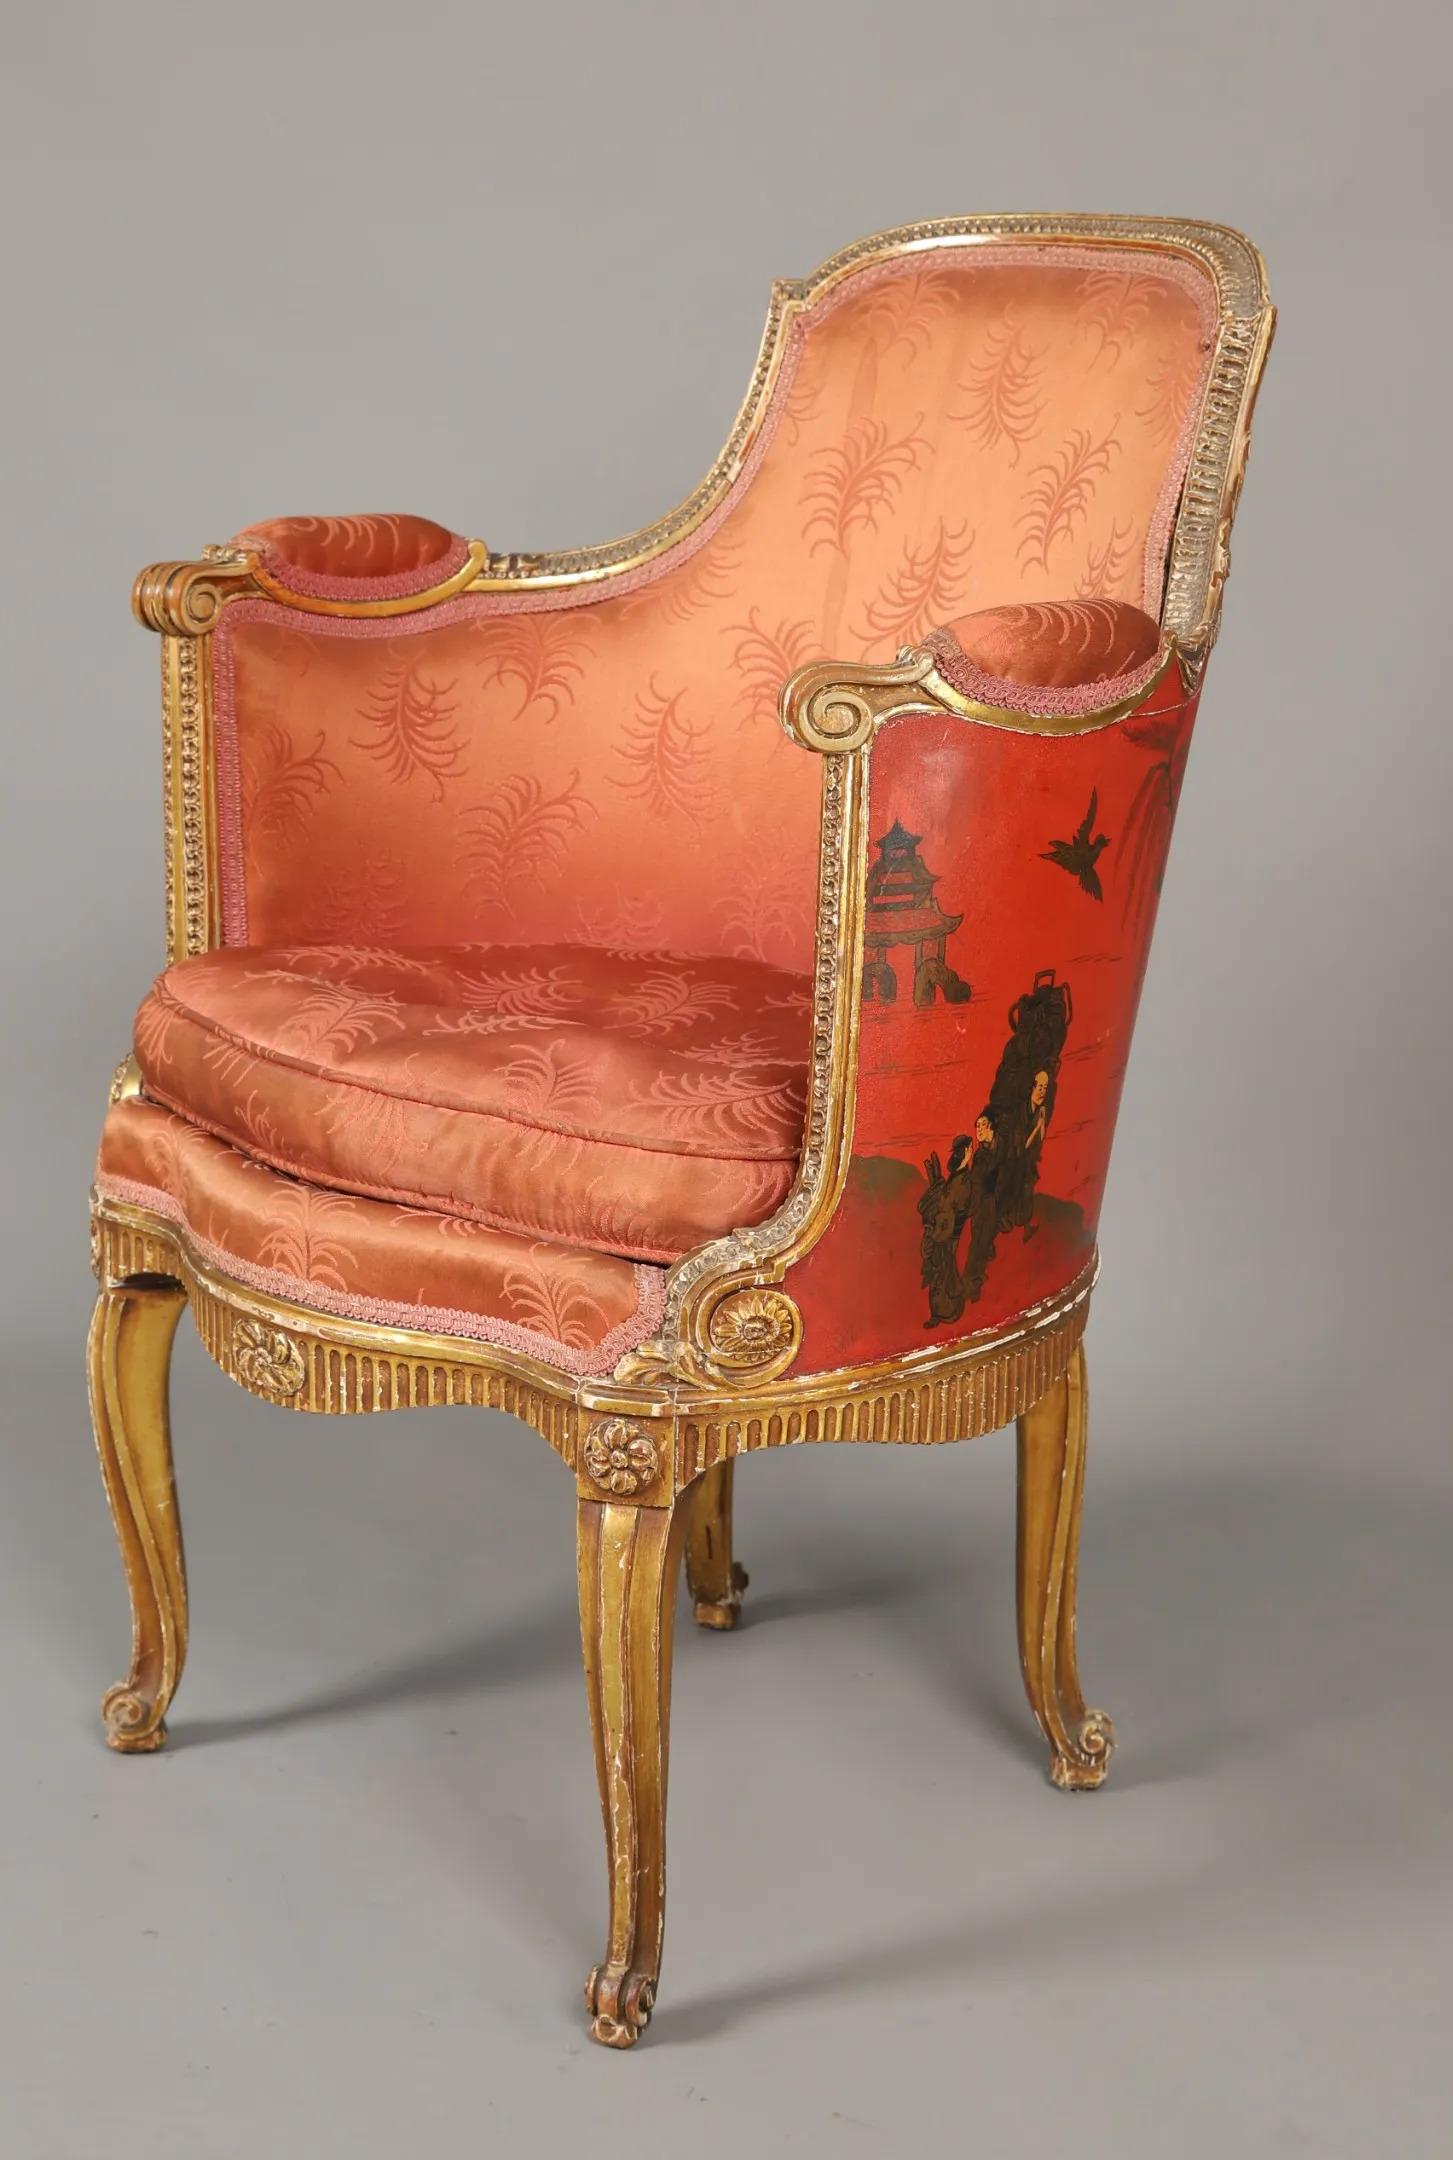 rare and original Louis XV transition armchair in gilded wood, back and side covered in lacquered wood with Chinese decoration, circa 1930